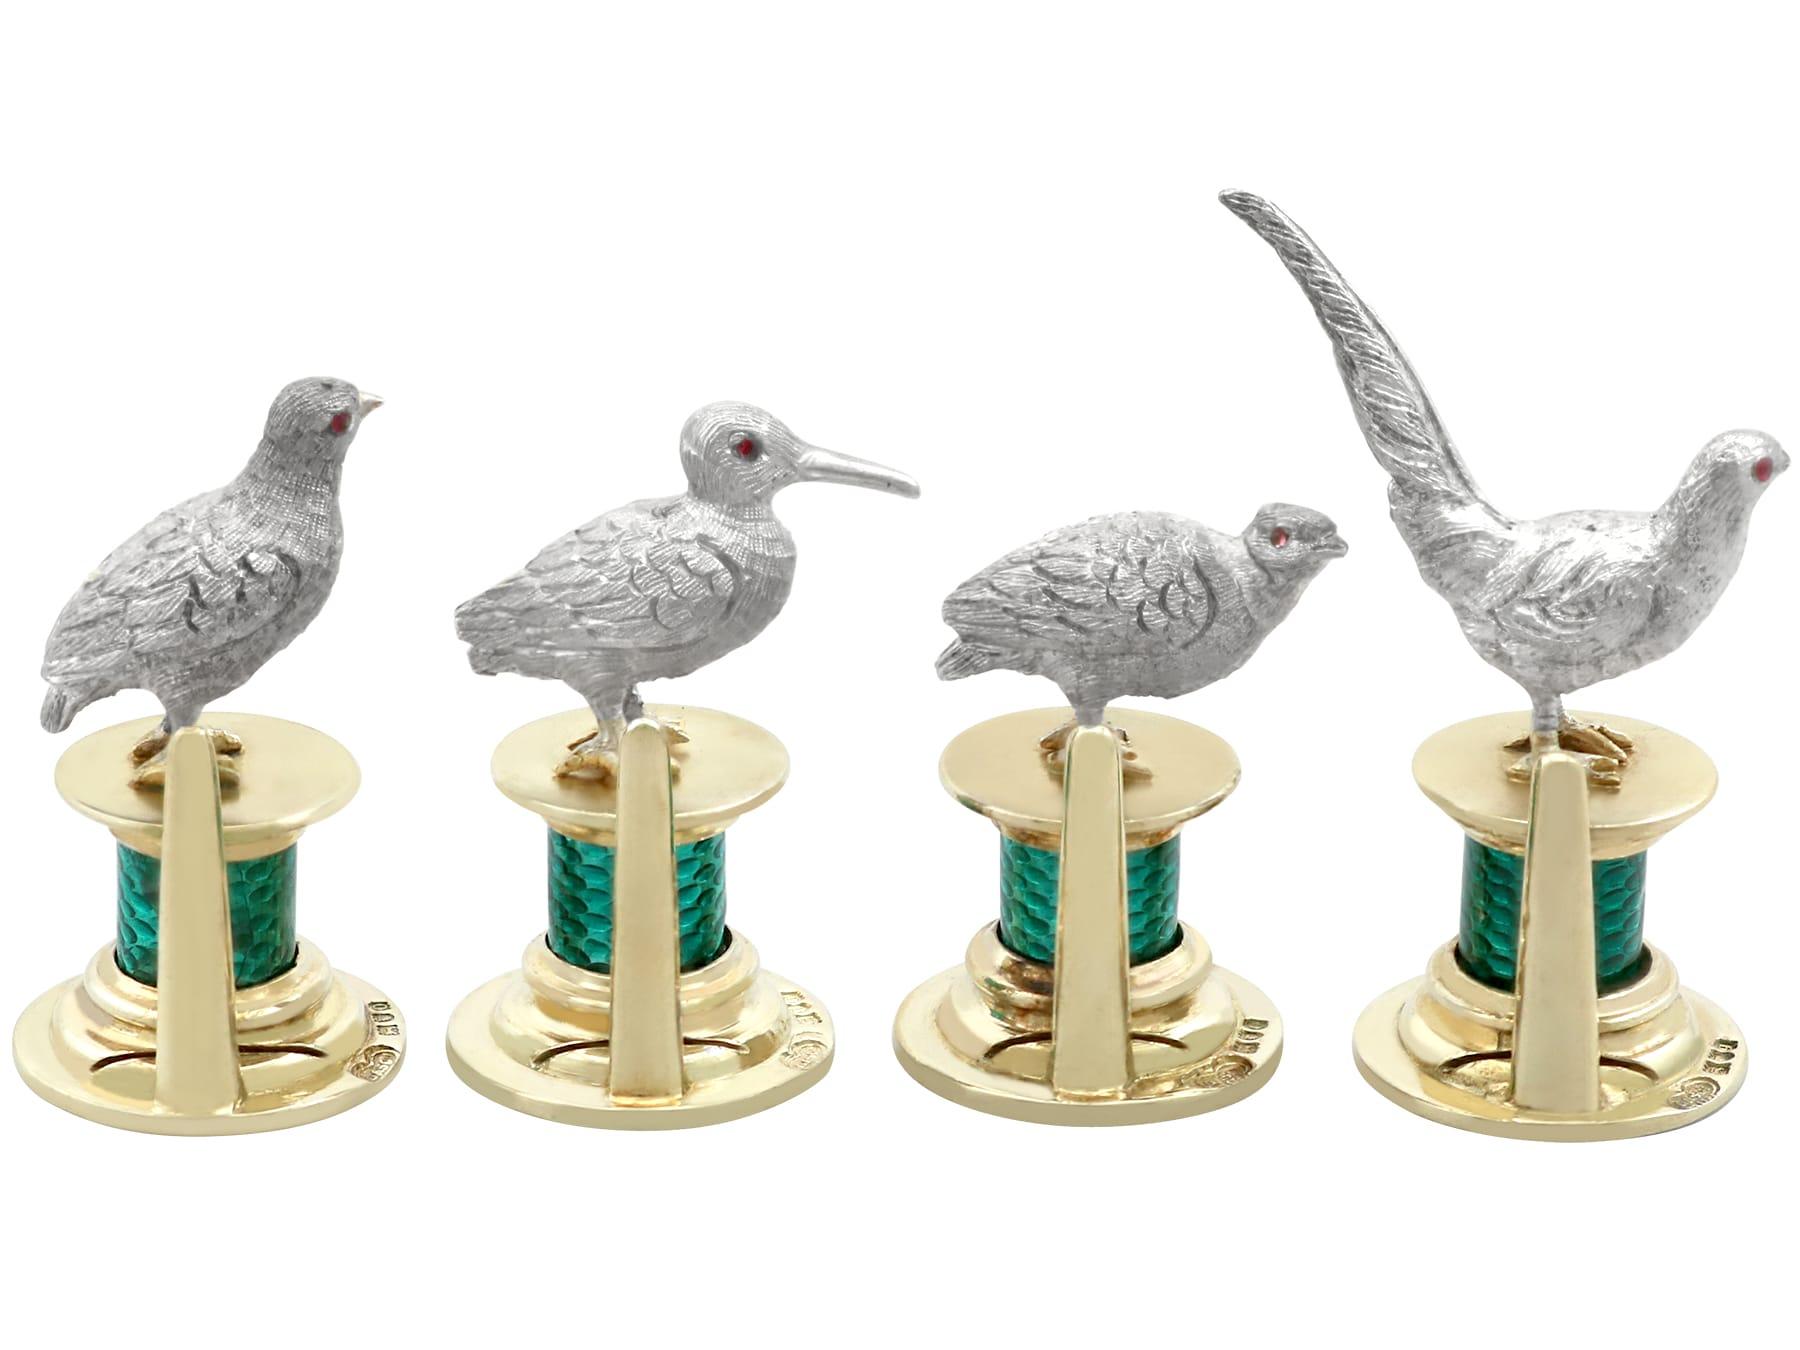 Early 20th Century Antique Edwardian Enamel and Sterling Silver Bird Menu / Card Holders (1909) For Sale